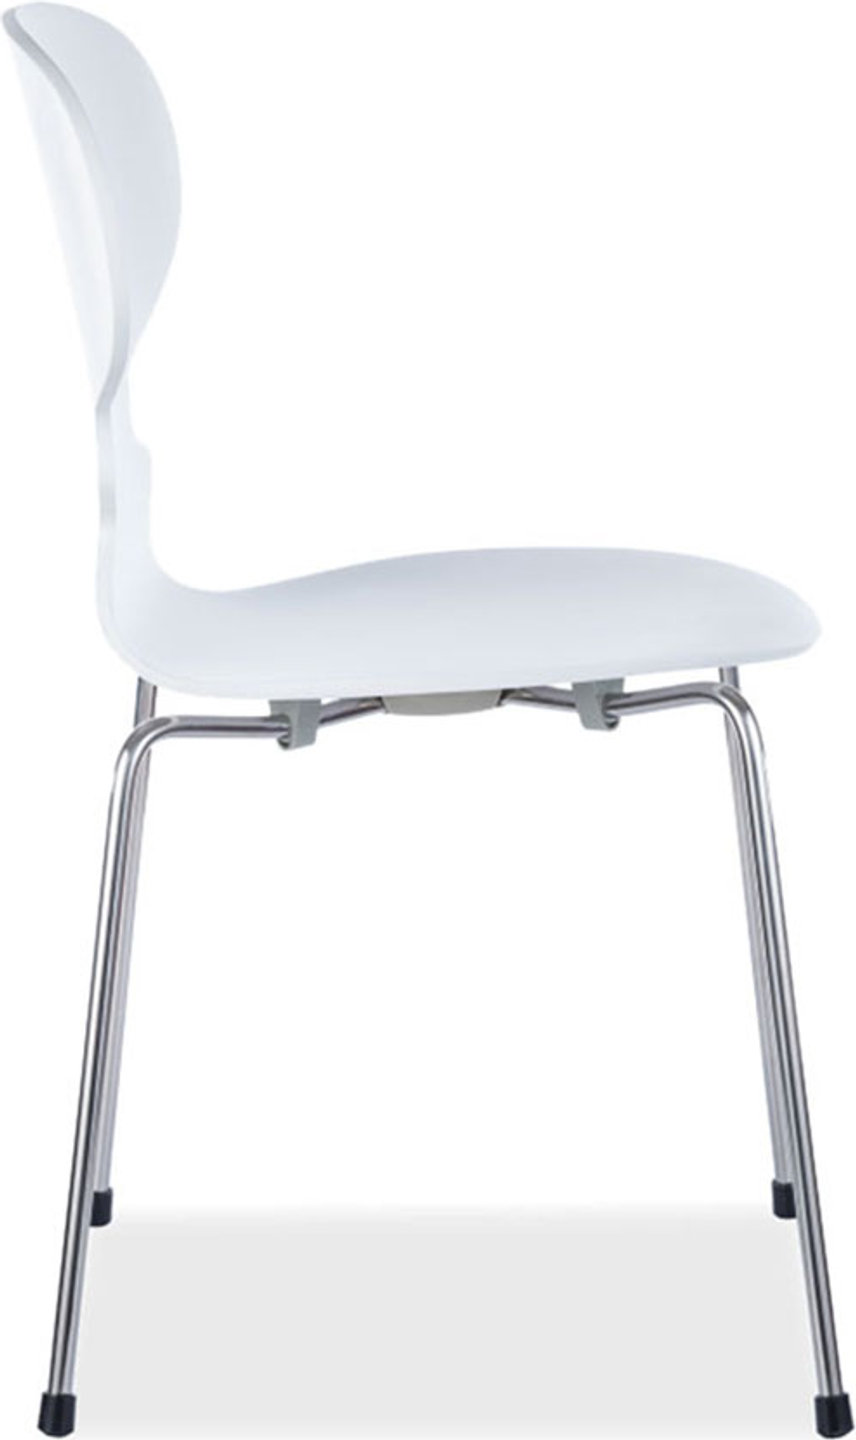 Ant chair White image.